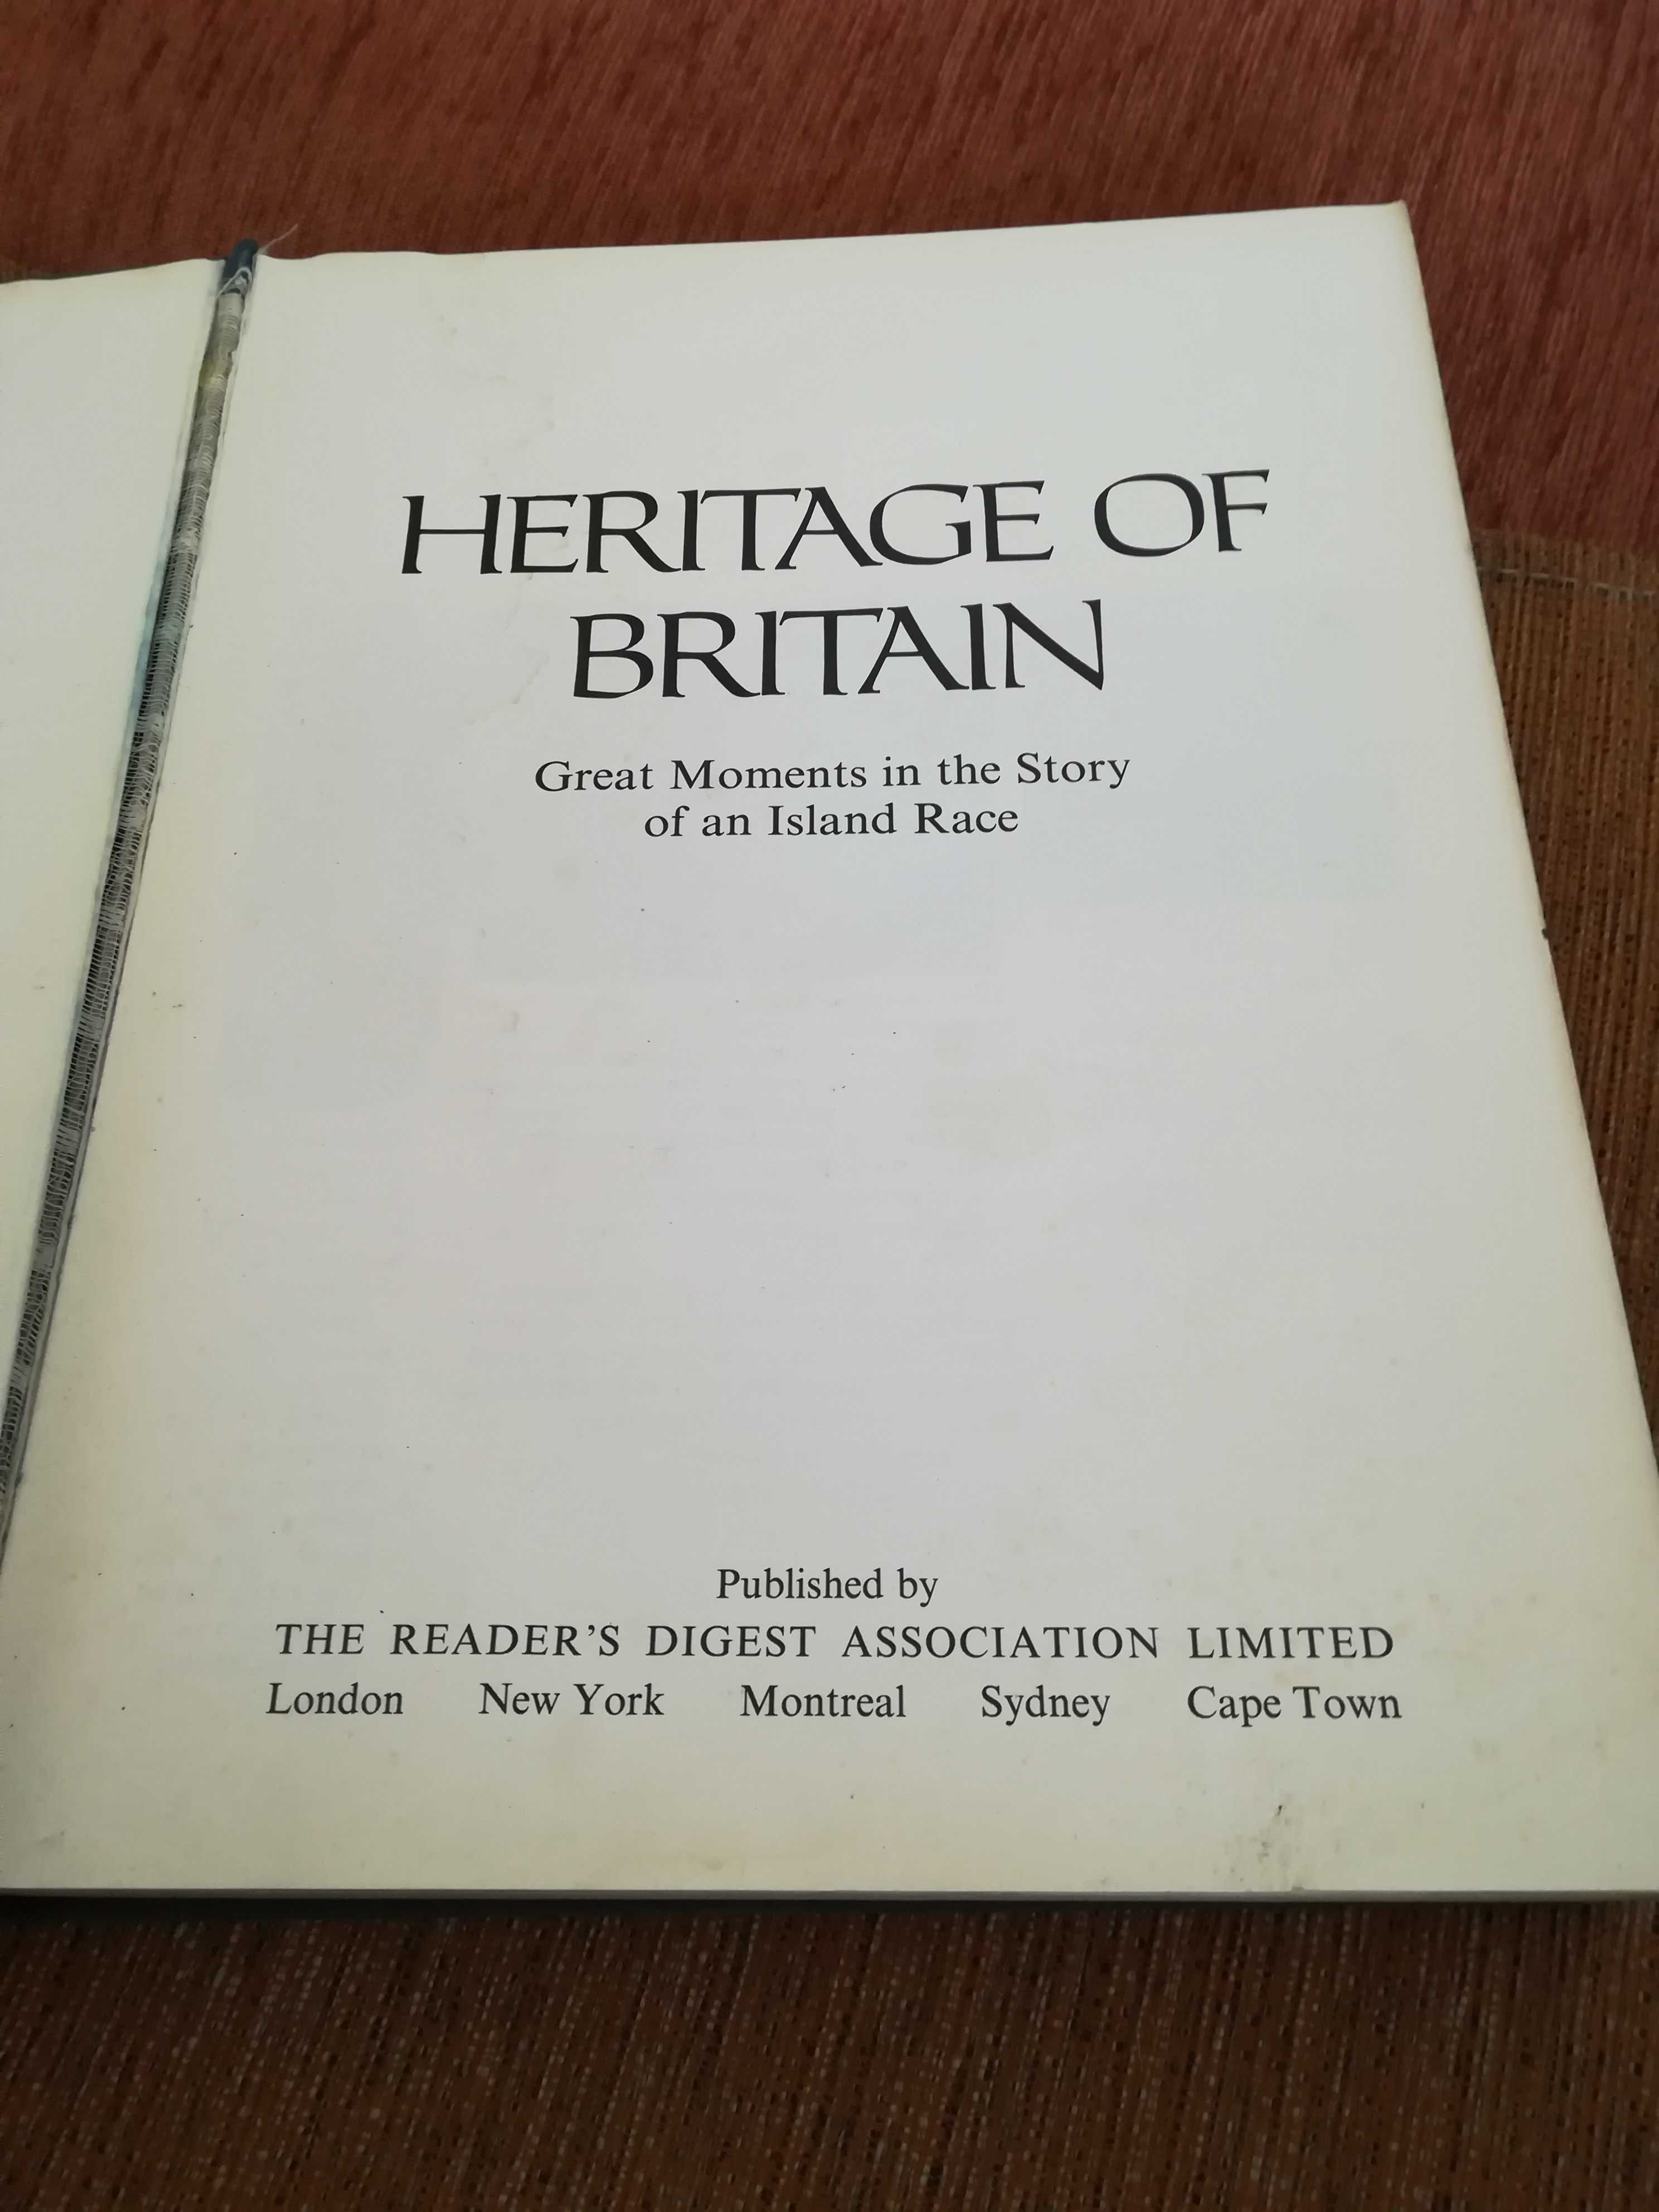 Heritage of Britain. Great moments in the story of an island race